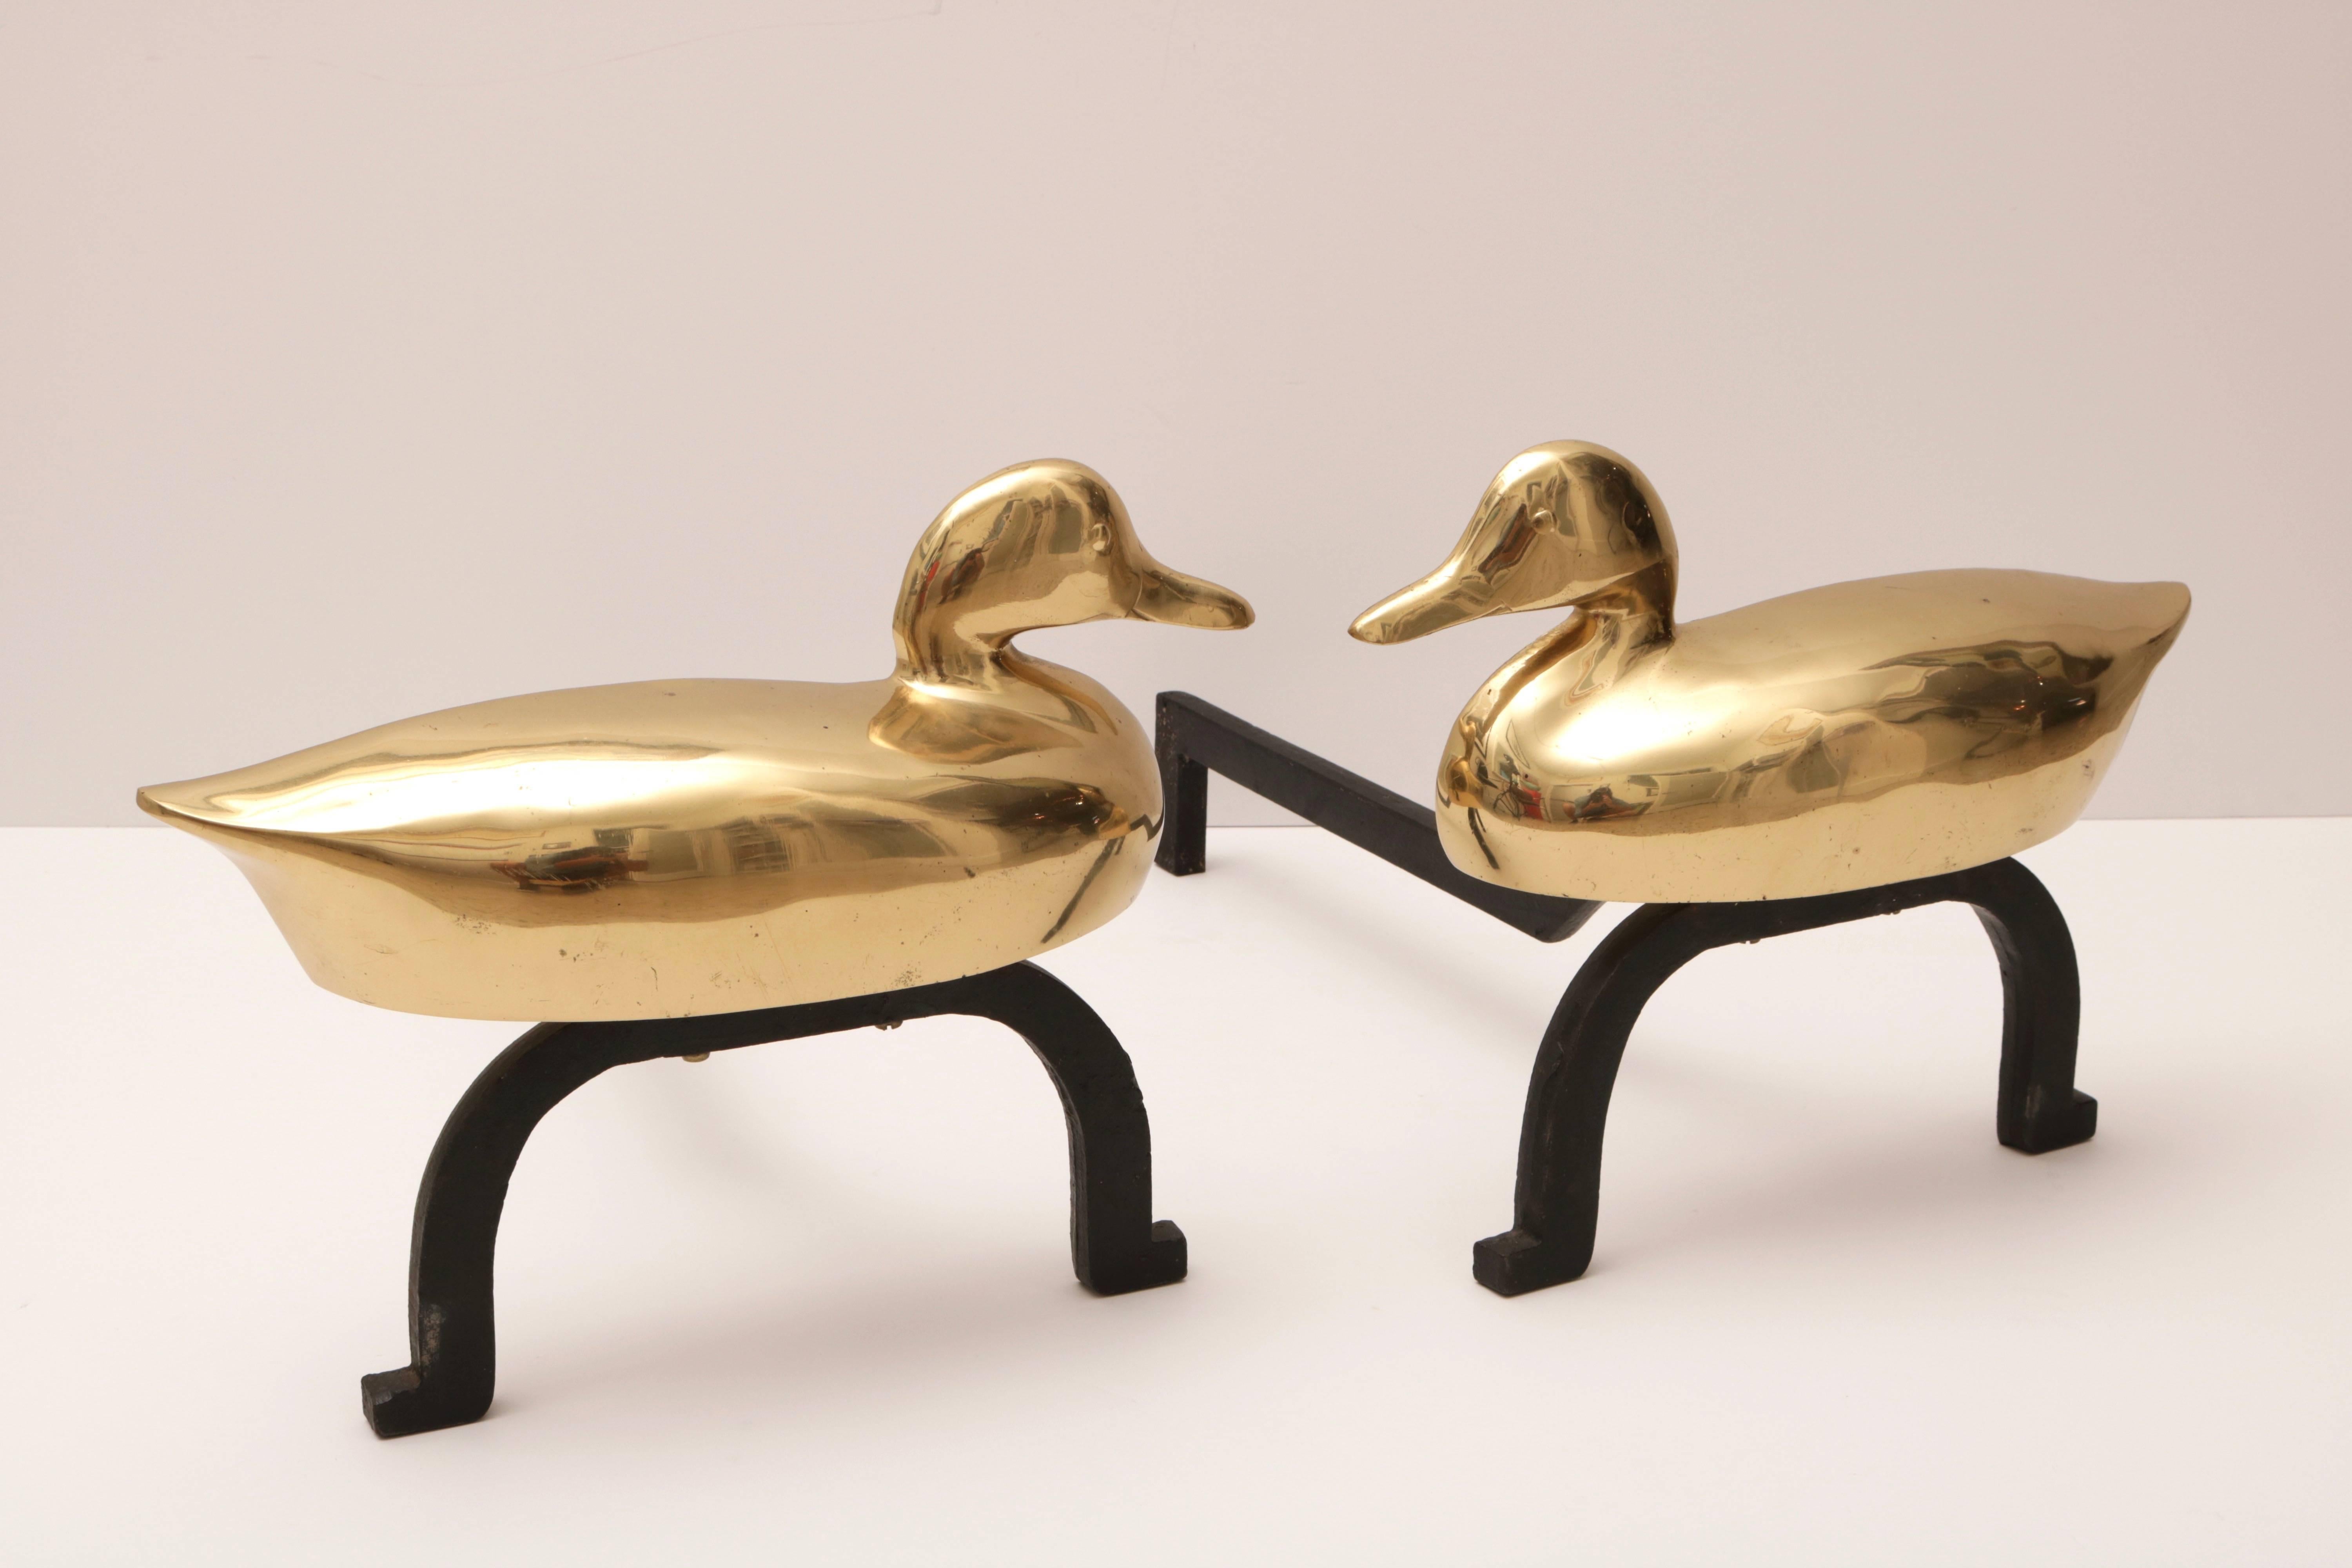 American Fireplace Andirons in the Form of a Mallard Duck Silhouette in Polished Brass